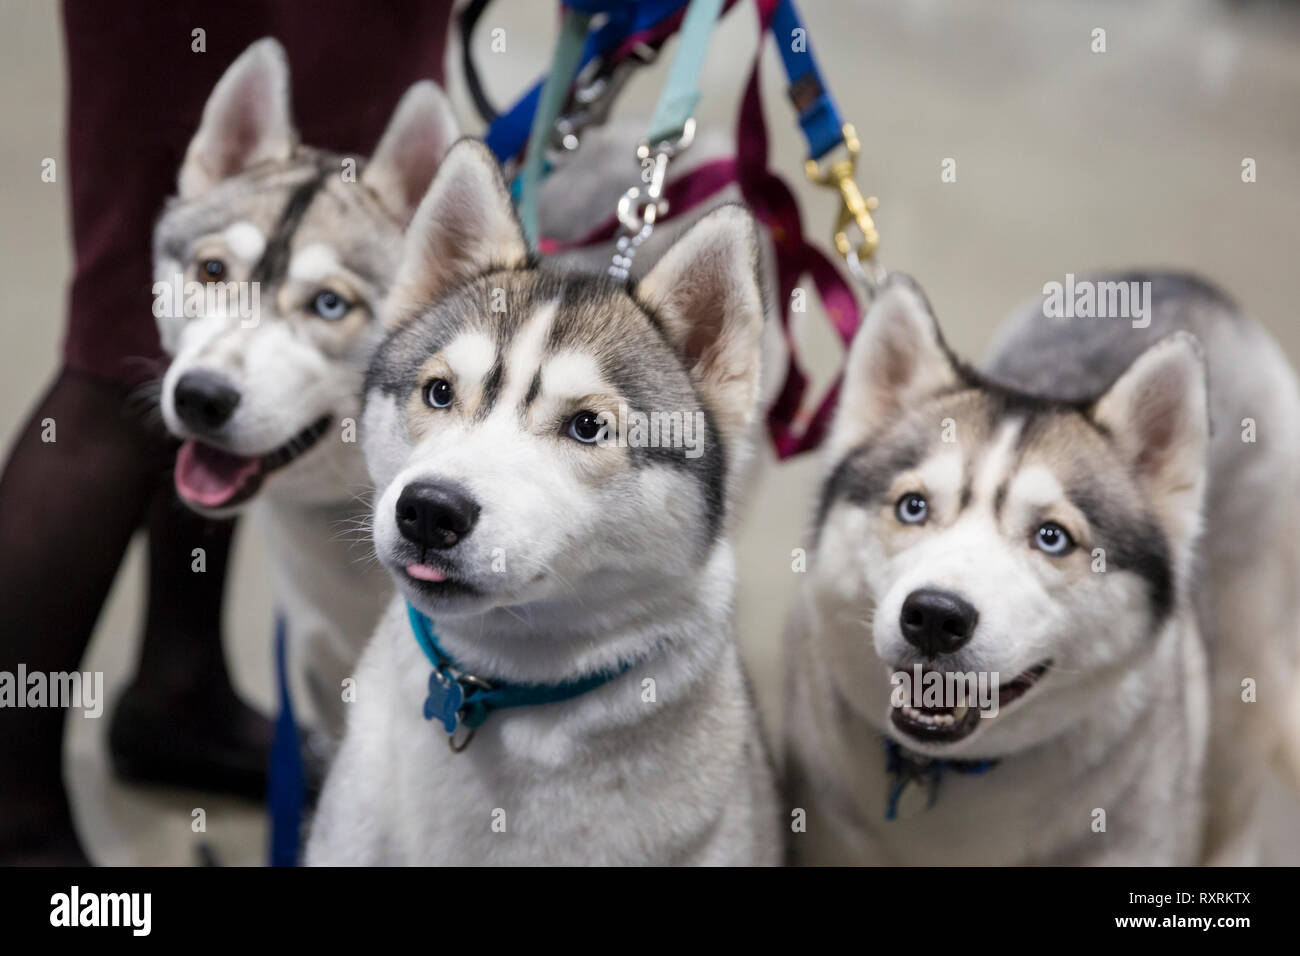 Seattle, USA. 09th Mar, 2019. A family of Huskies at the 2019 Seattle Kennel Club Dog Show. Approximately 160 different breeds participate in the annual All-Breed dog show. Credit: Paul Christian Gordon/Alamy Live News Stock Photo